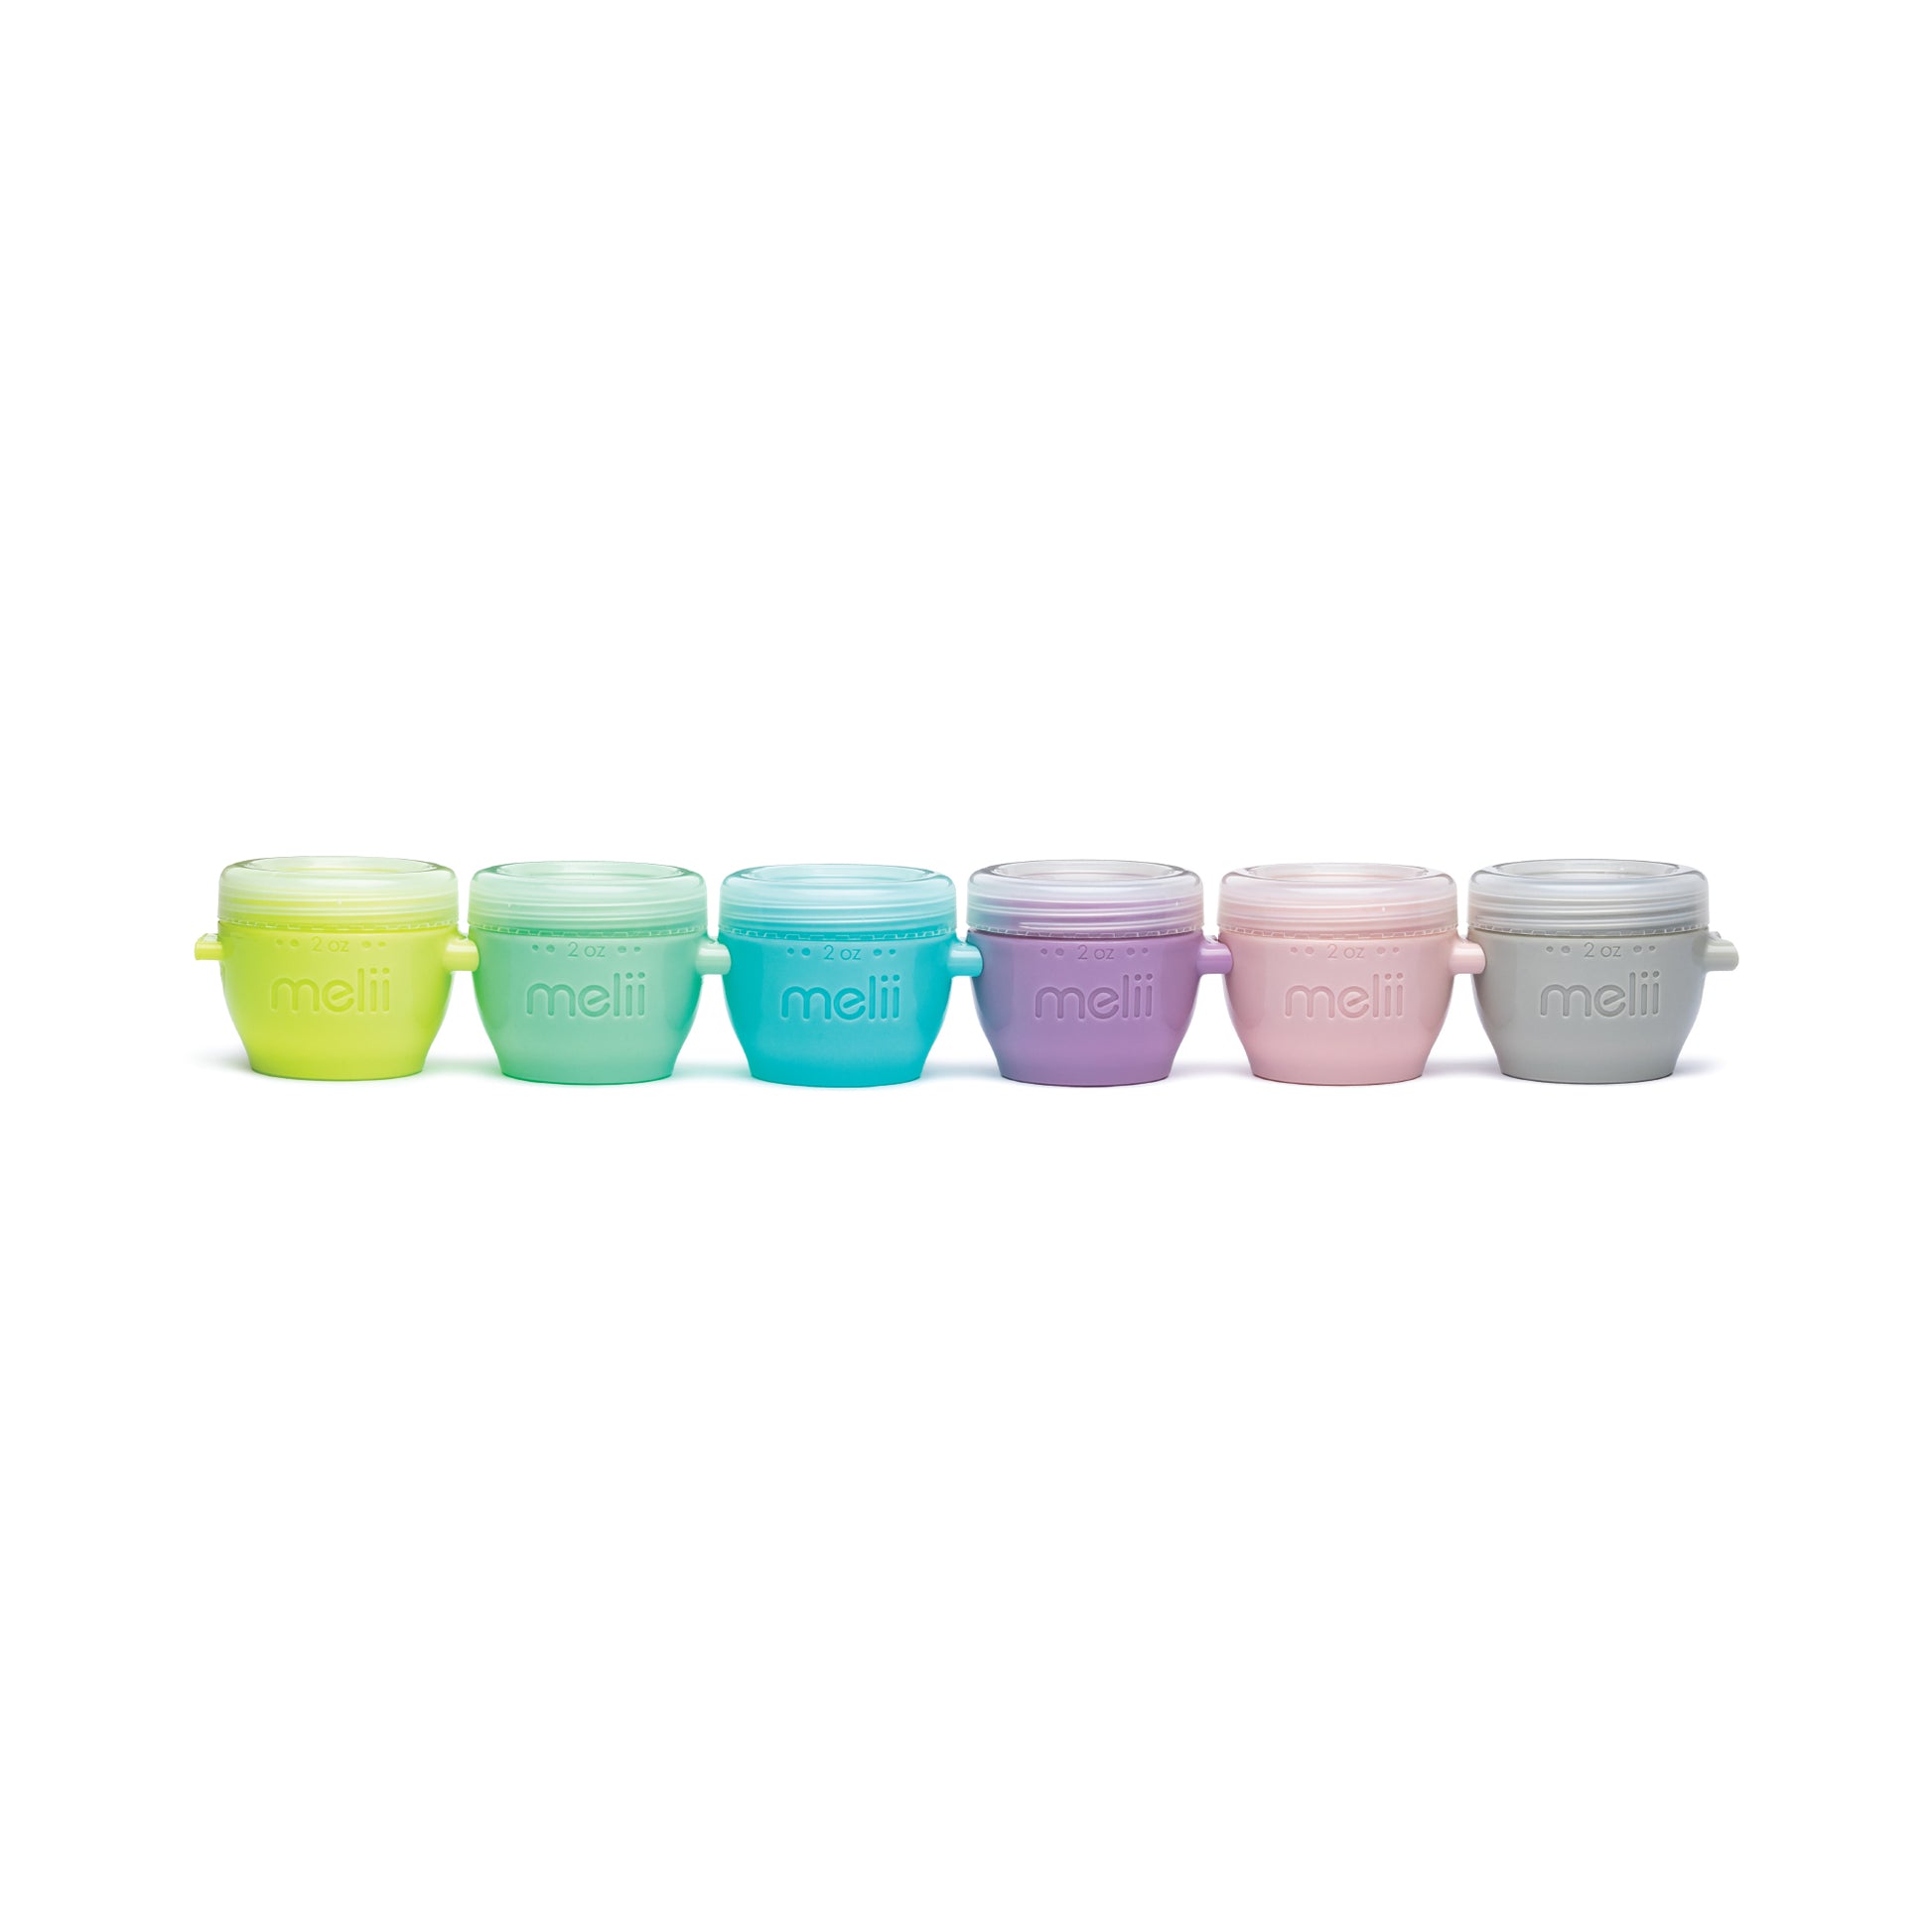 Melii Snap & Go Pods - Airtight & Leakproof Baby Food Containers - Baby Food Storage Pods for Effortless Mealtime, 2oz, Set of 6